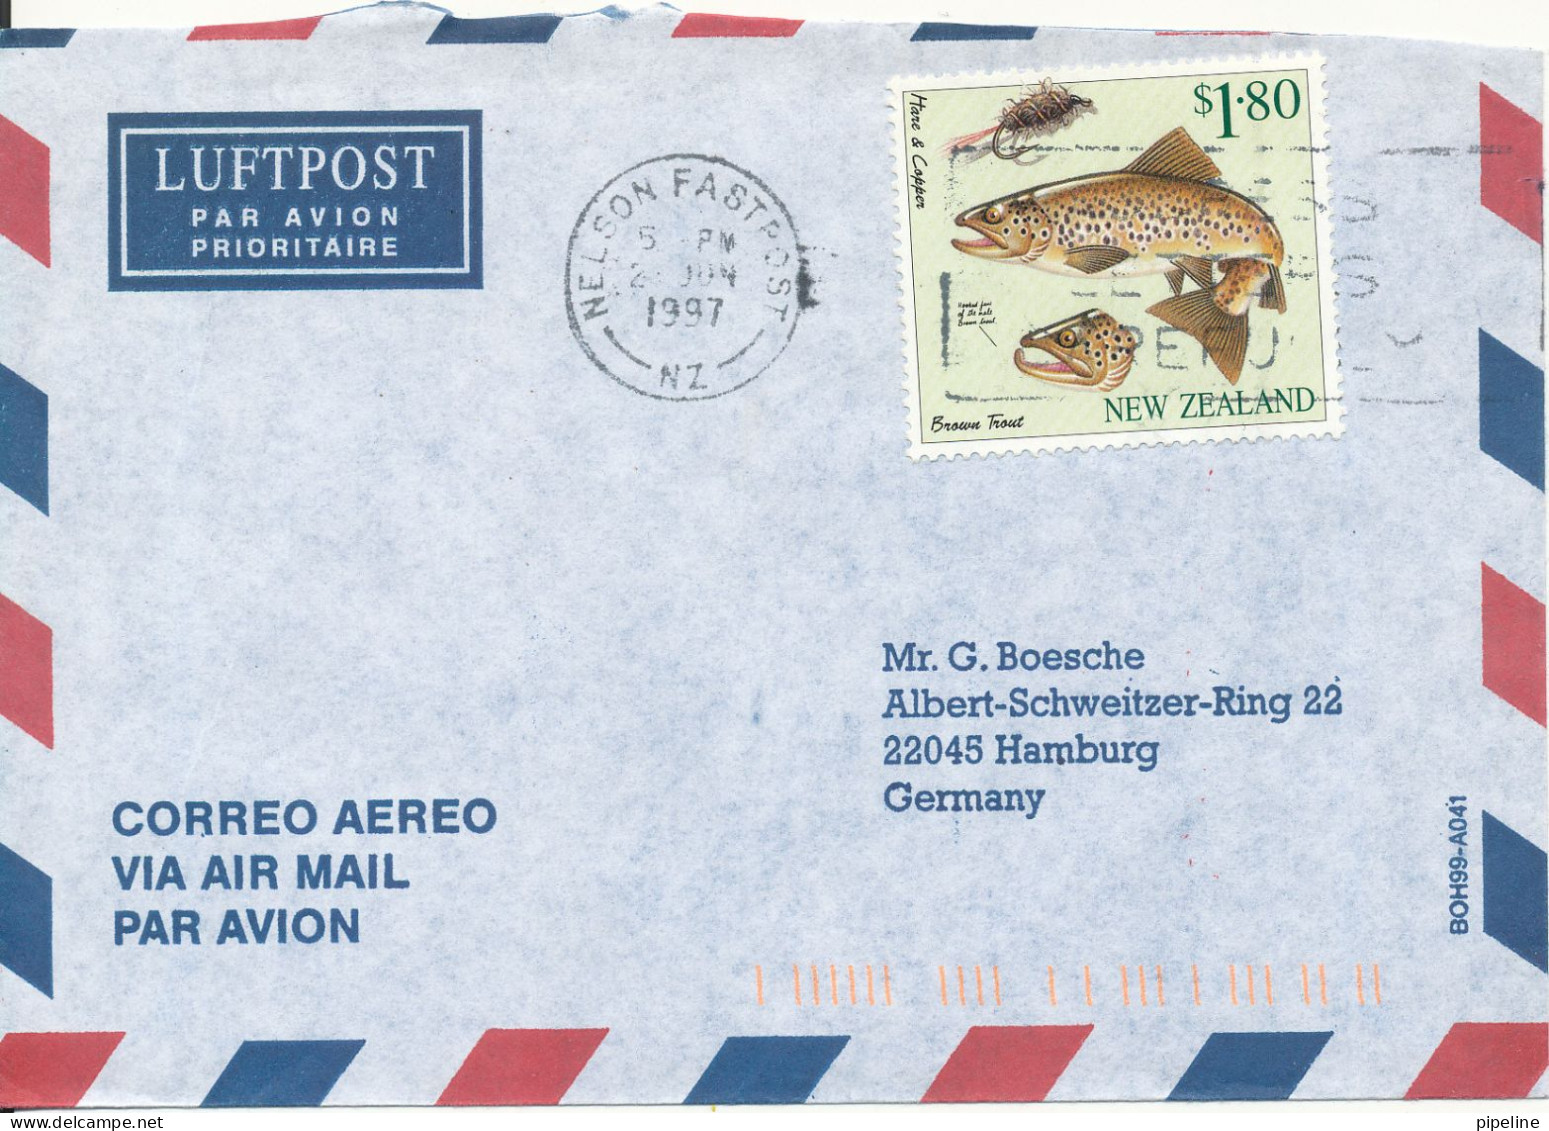 New Zealand Air Mail Cover Sent To Germany 1997 Single Franked - Luftpost